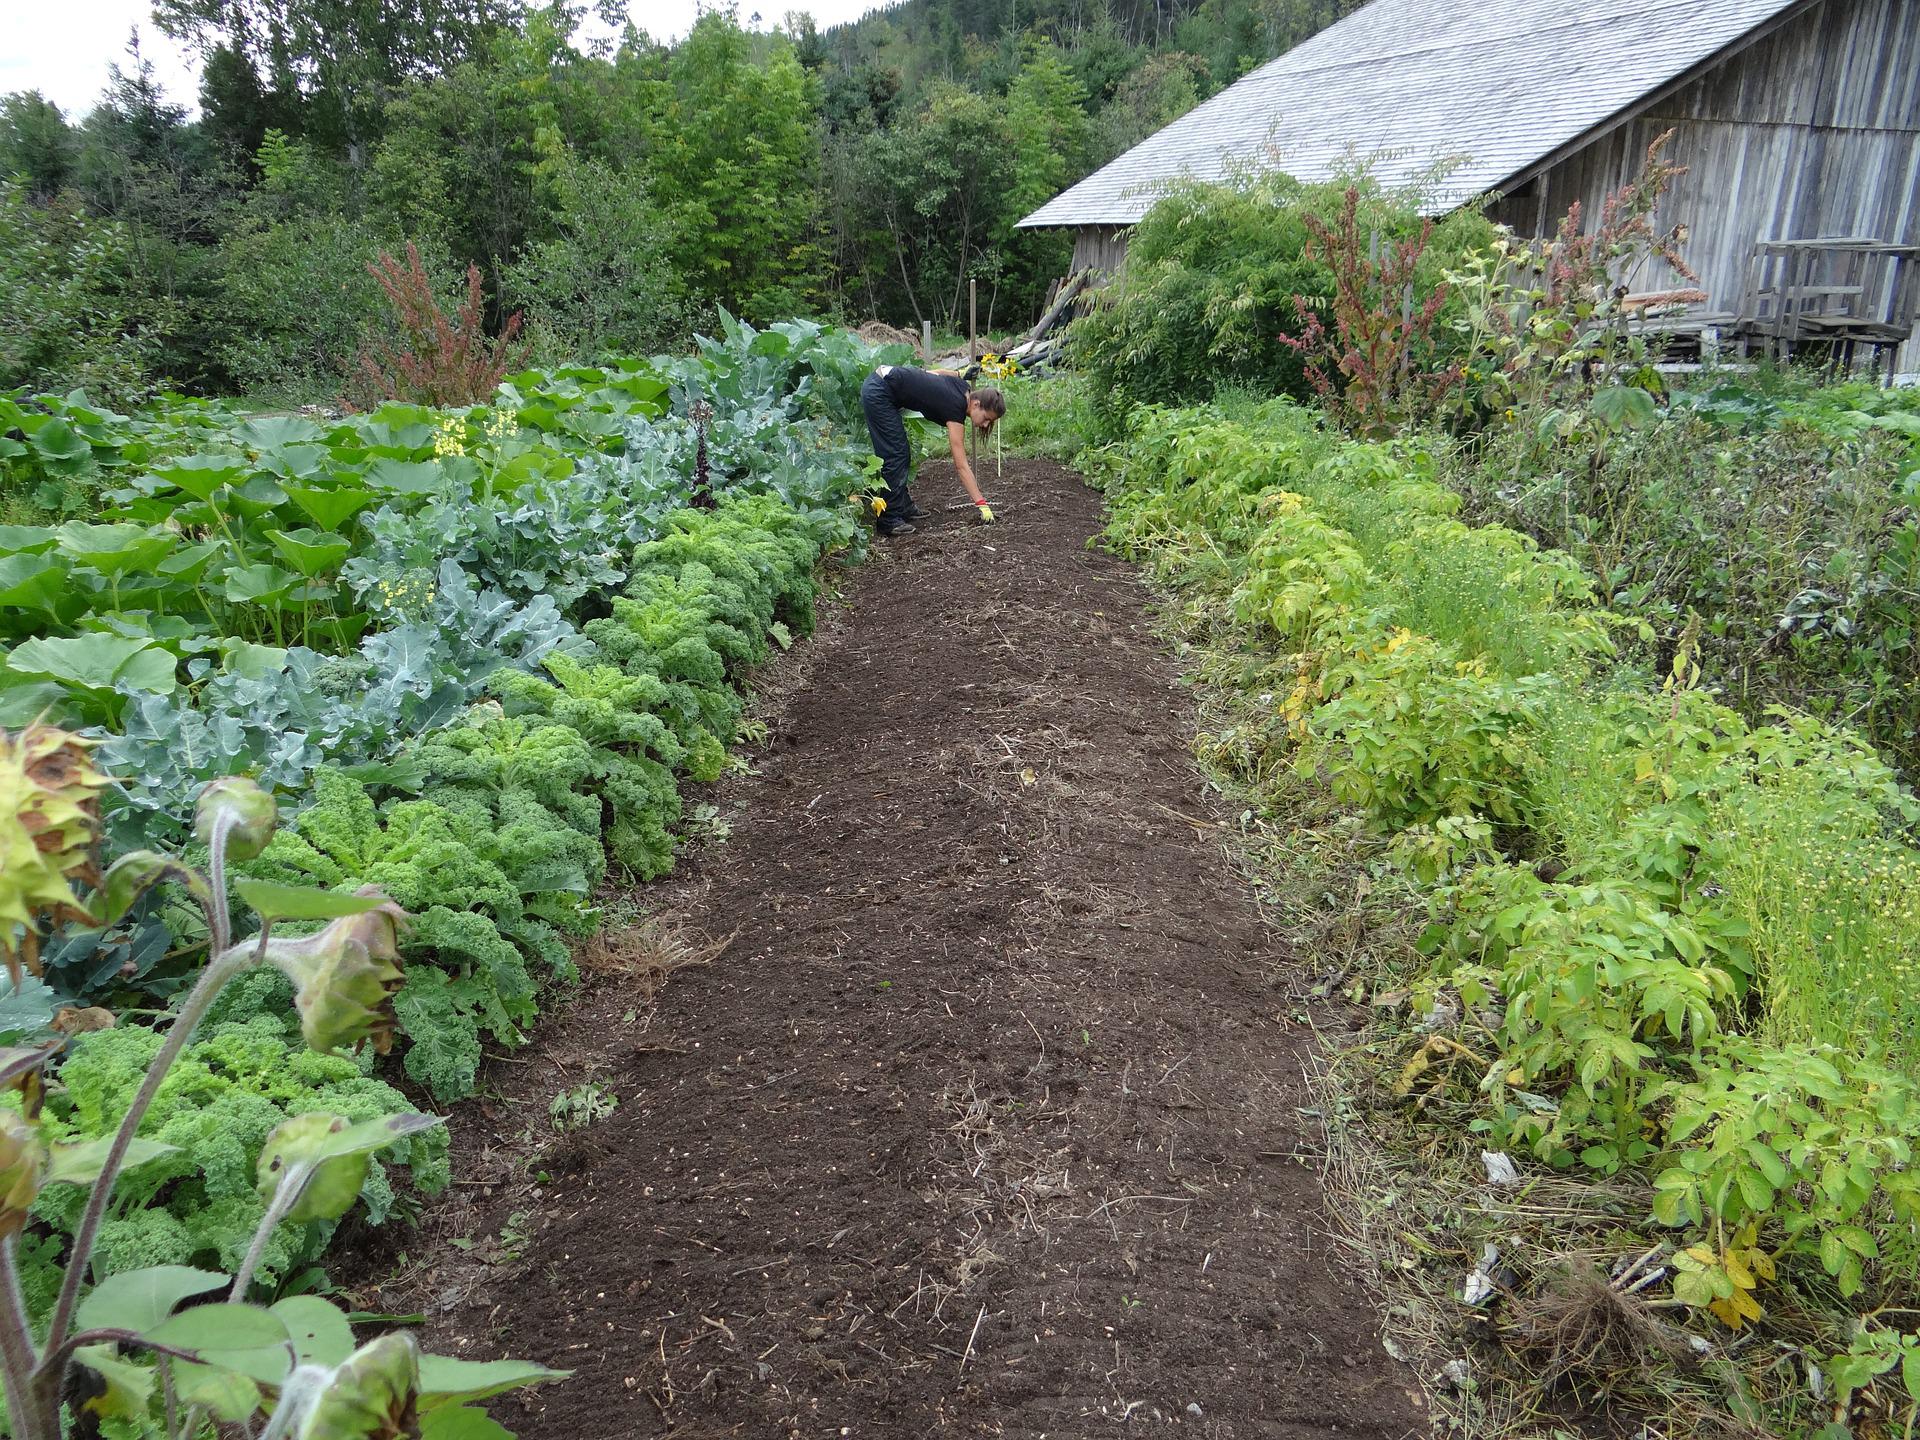 Woman planting fall vegetables in a vegetable garden.